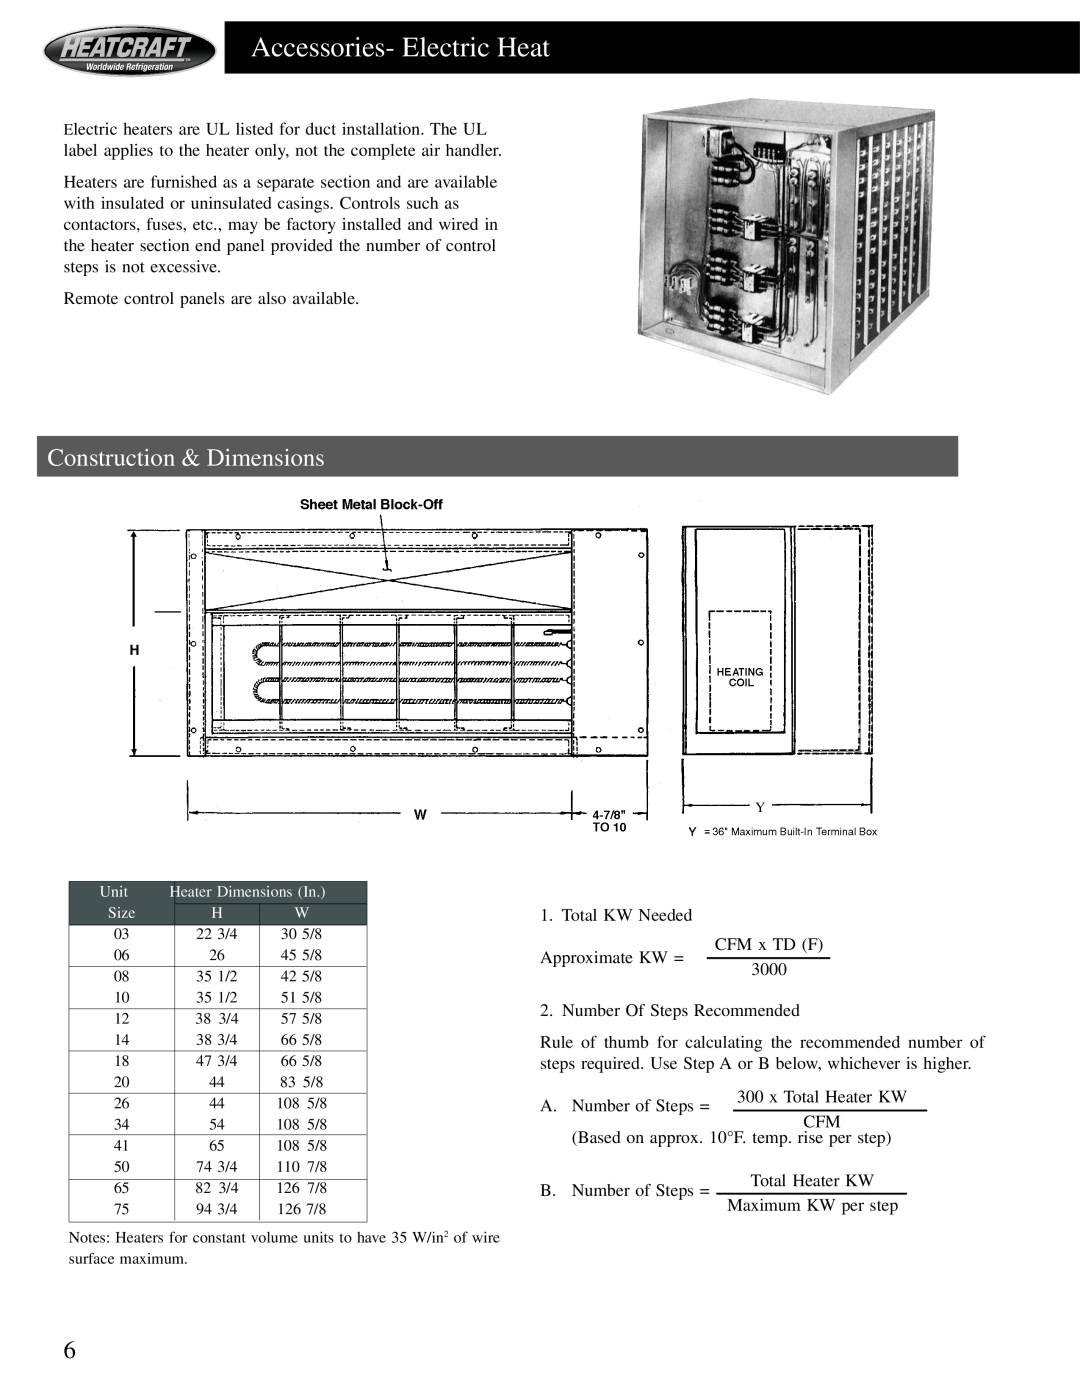 Heatcraft Refrigeration Products HCS manual Accessories- Electric Heat, Construction & Dimensions 